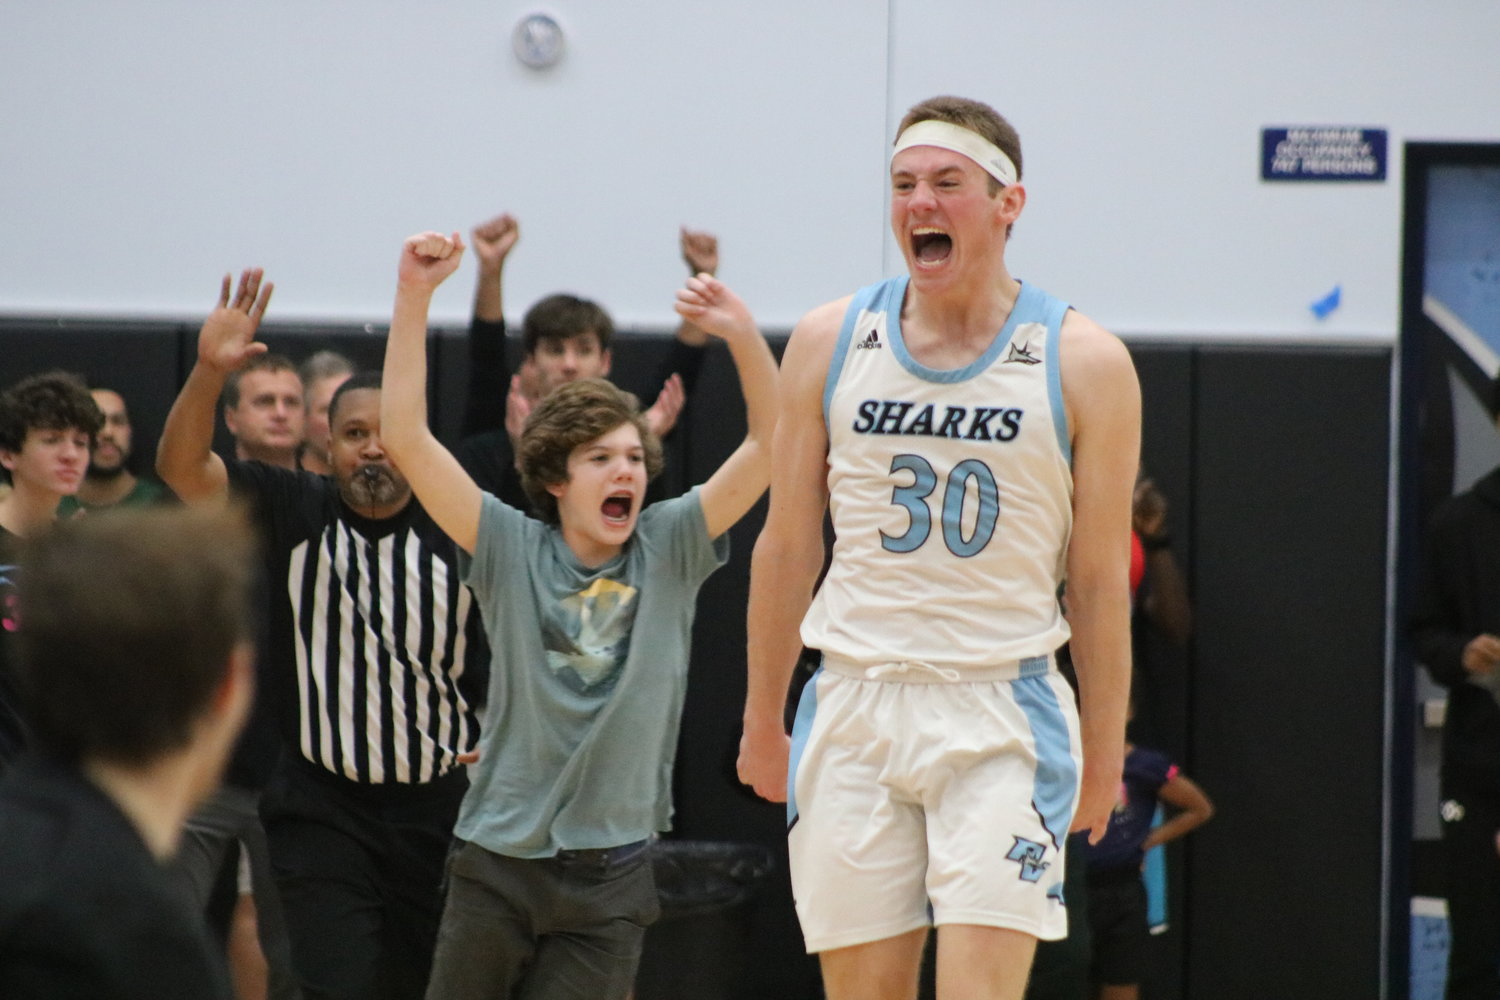 Ross Candelino shows his excitement as fans run onto the court to celebrate the school’s first boys basketball final four appearance.